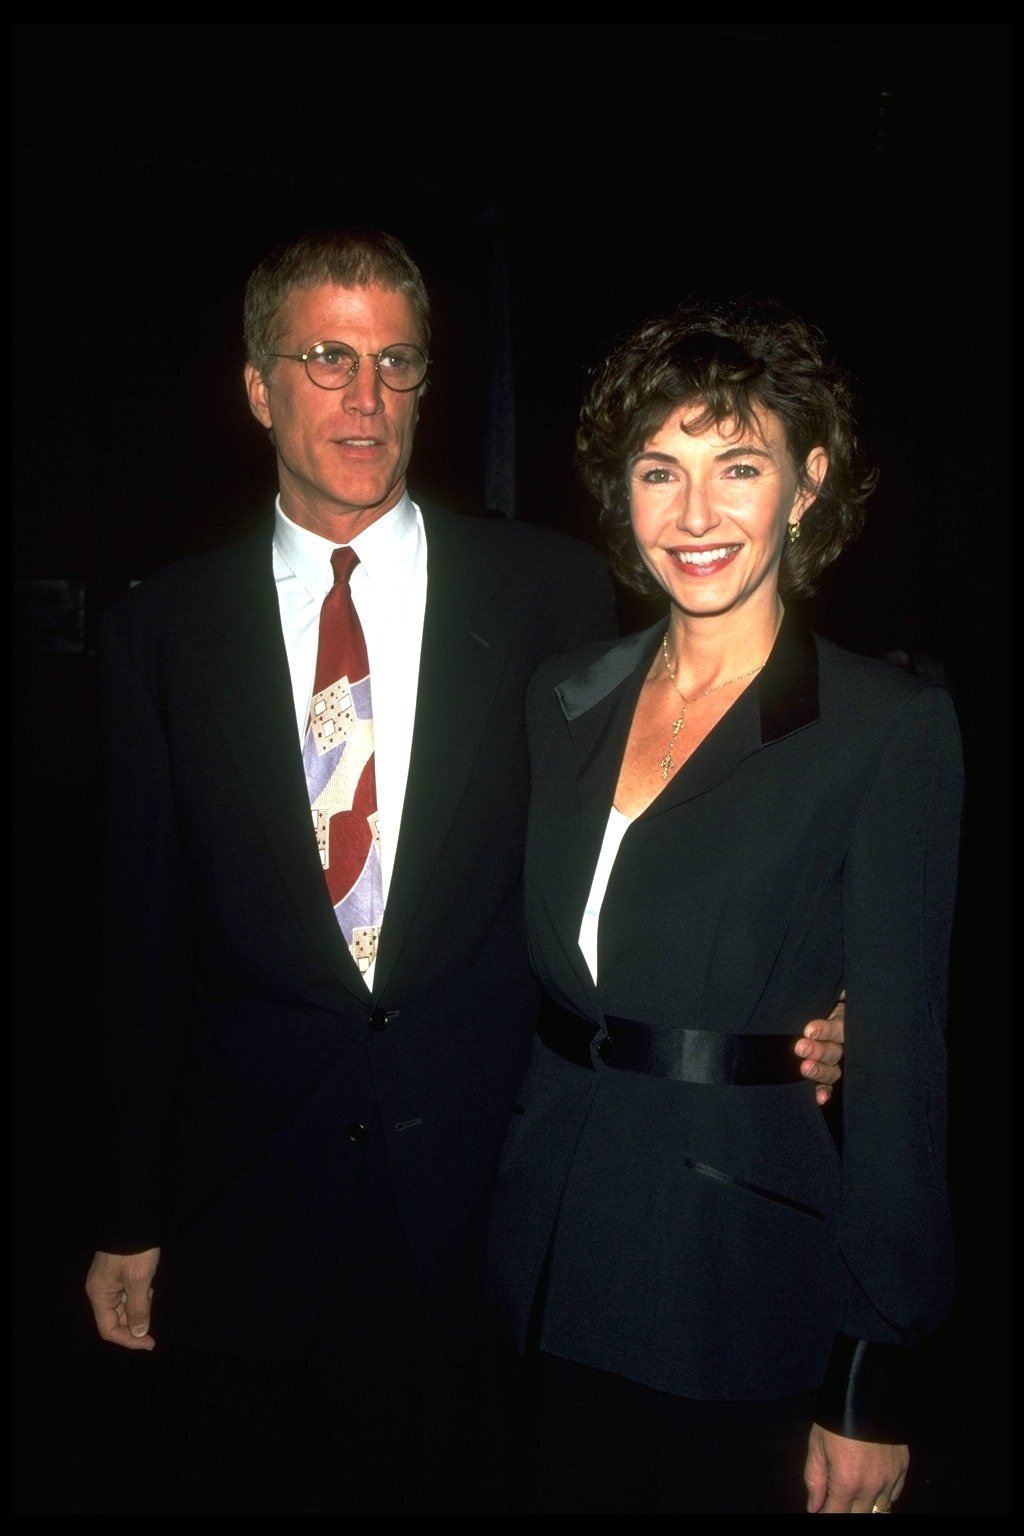 Ted Danson and Mary Steenburgen during the premiere of "Gulliver's Travels" in 1996  | Source: Getty Images